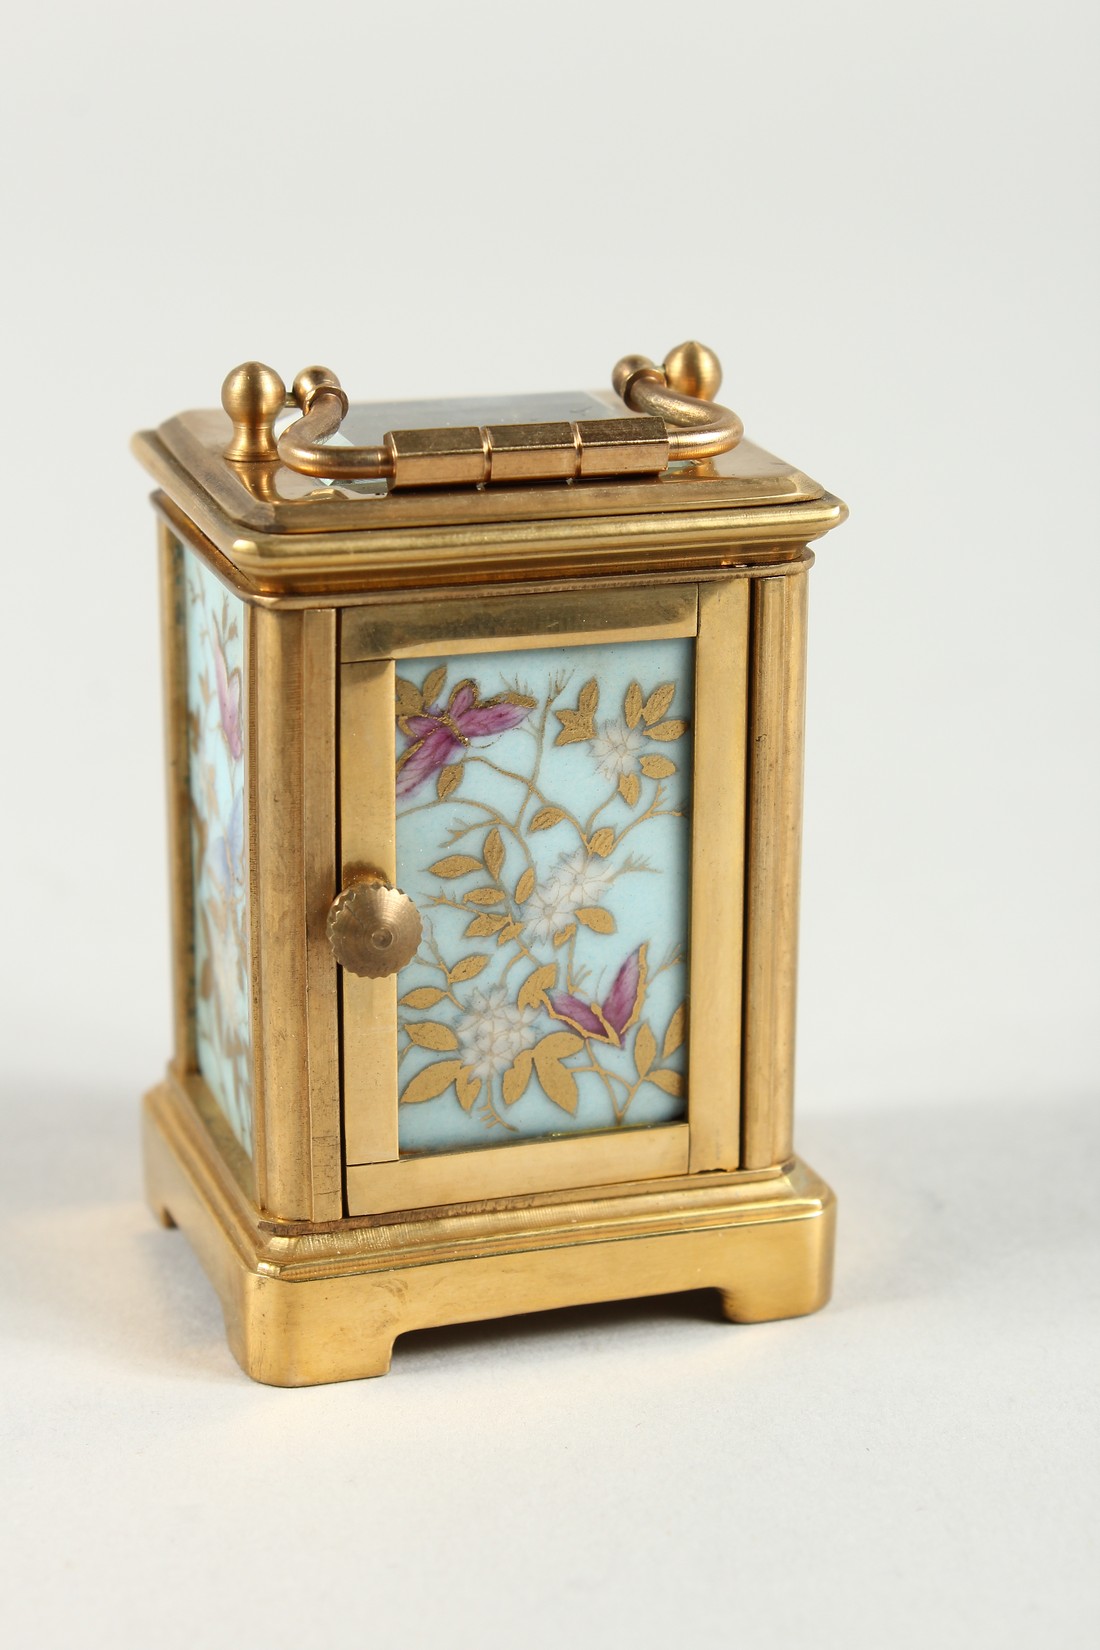 A MINIATURE SEVRES CARRIAGE CLOCK with flora porcelain panels. 2.25ins high. - Image 3 of 7